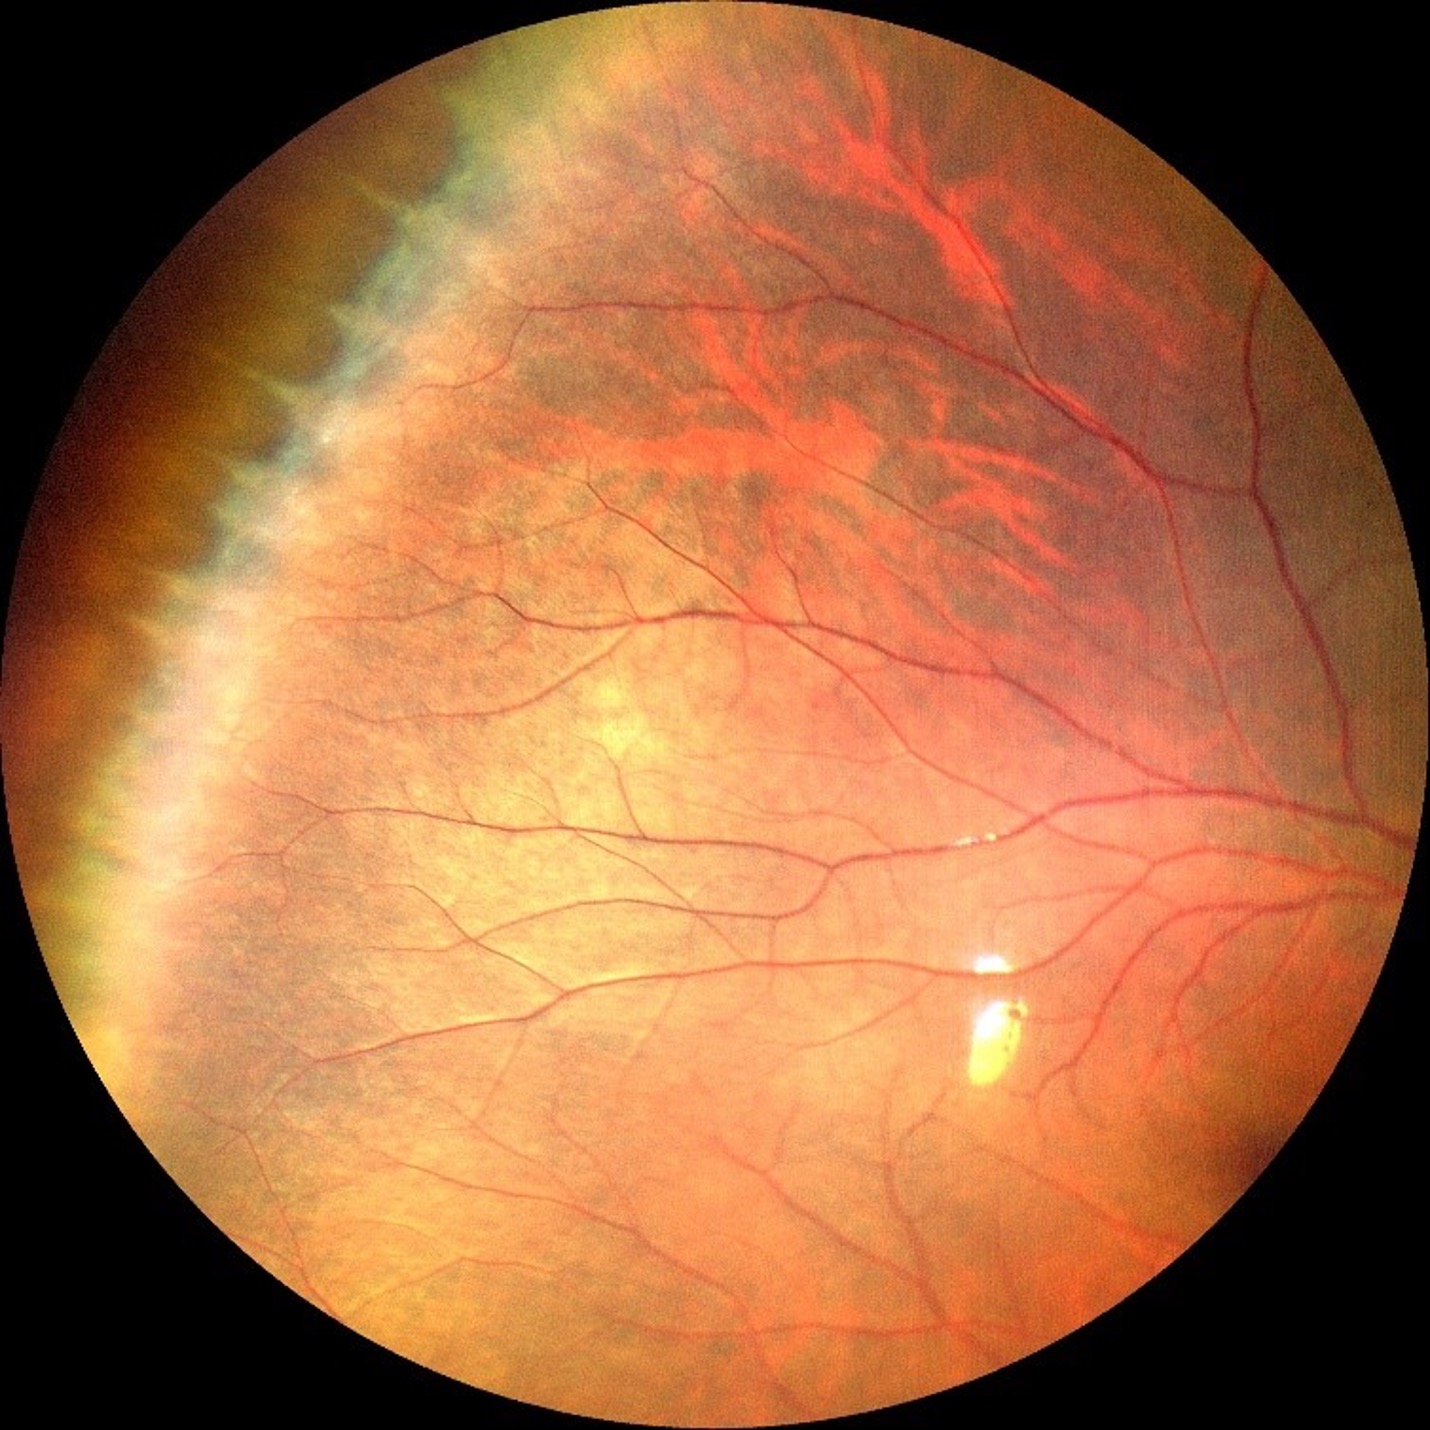 ZEISS CLARUS 500 ultra-wide field image captures peripheral retinal in a myopic eye. 